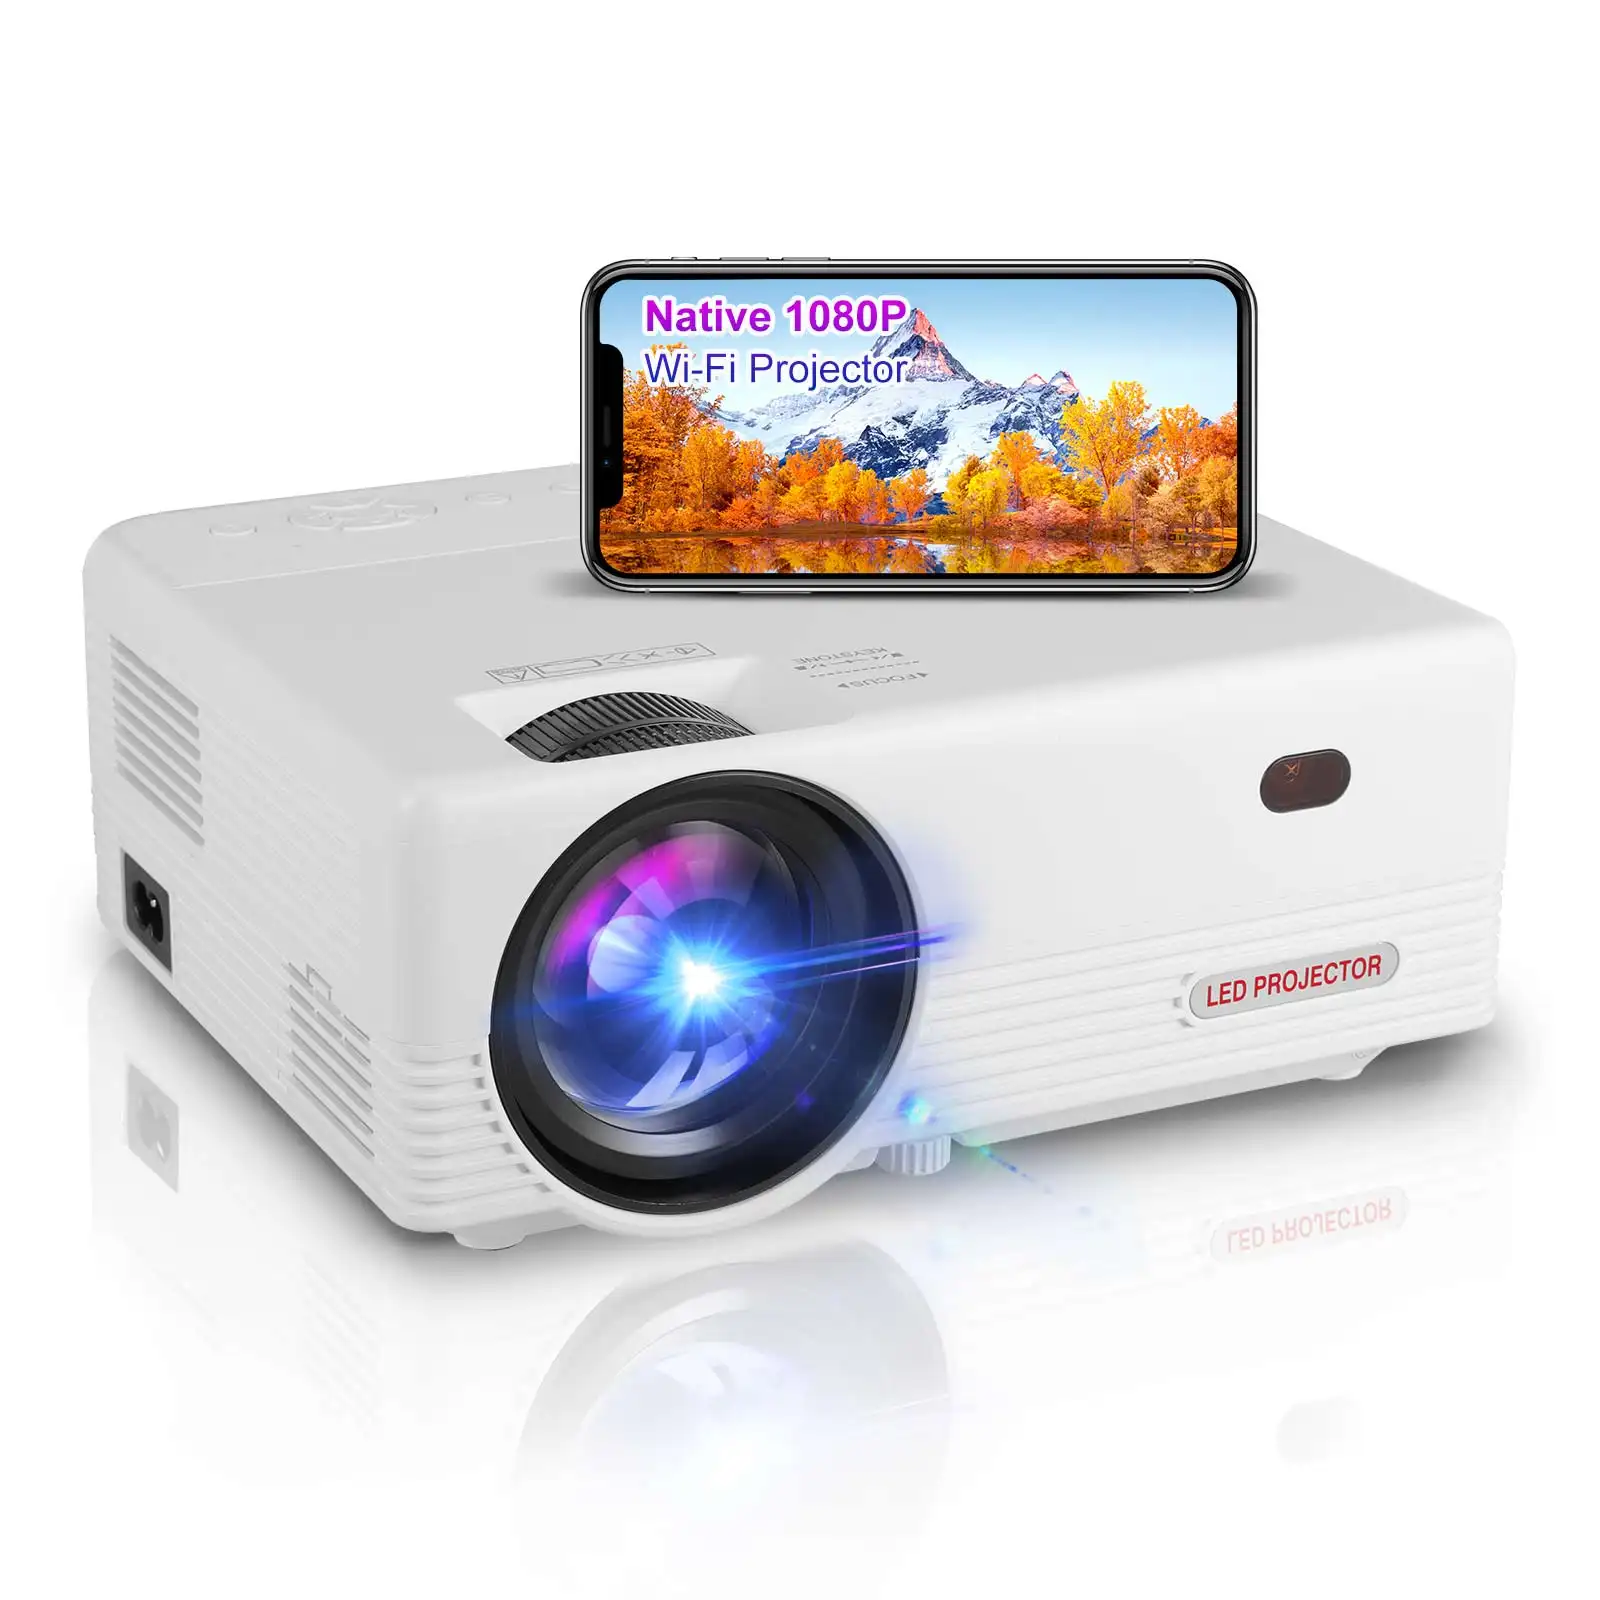 Only sold in USA 7 Days Free Shipping To USA Native 1080P WiFi Mobile Projector Compatible with Smartphone, TV Stick, HDMI